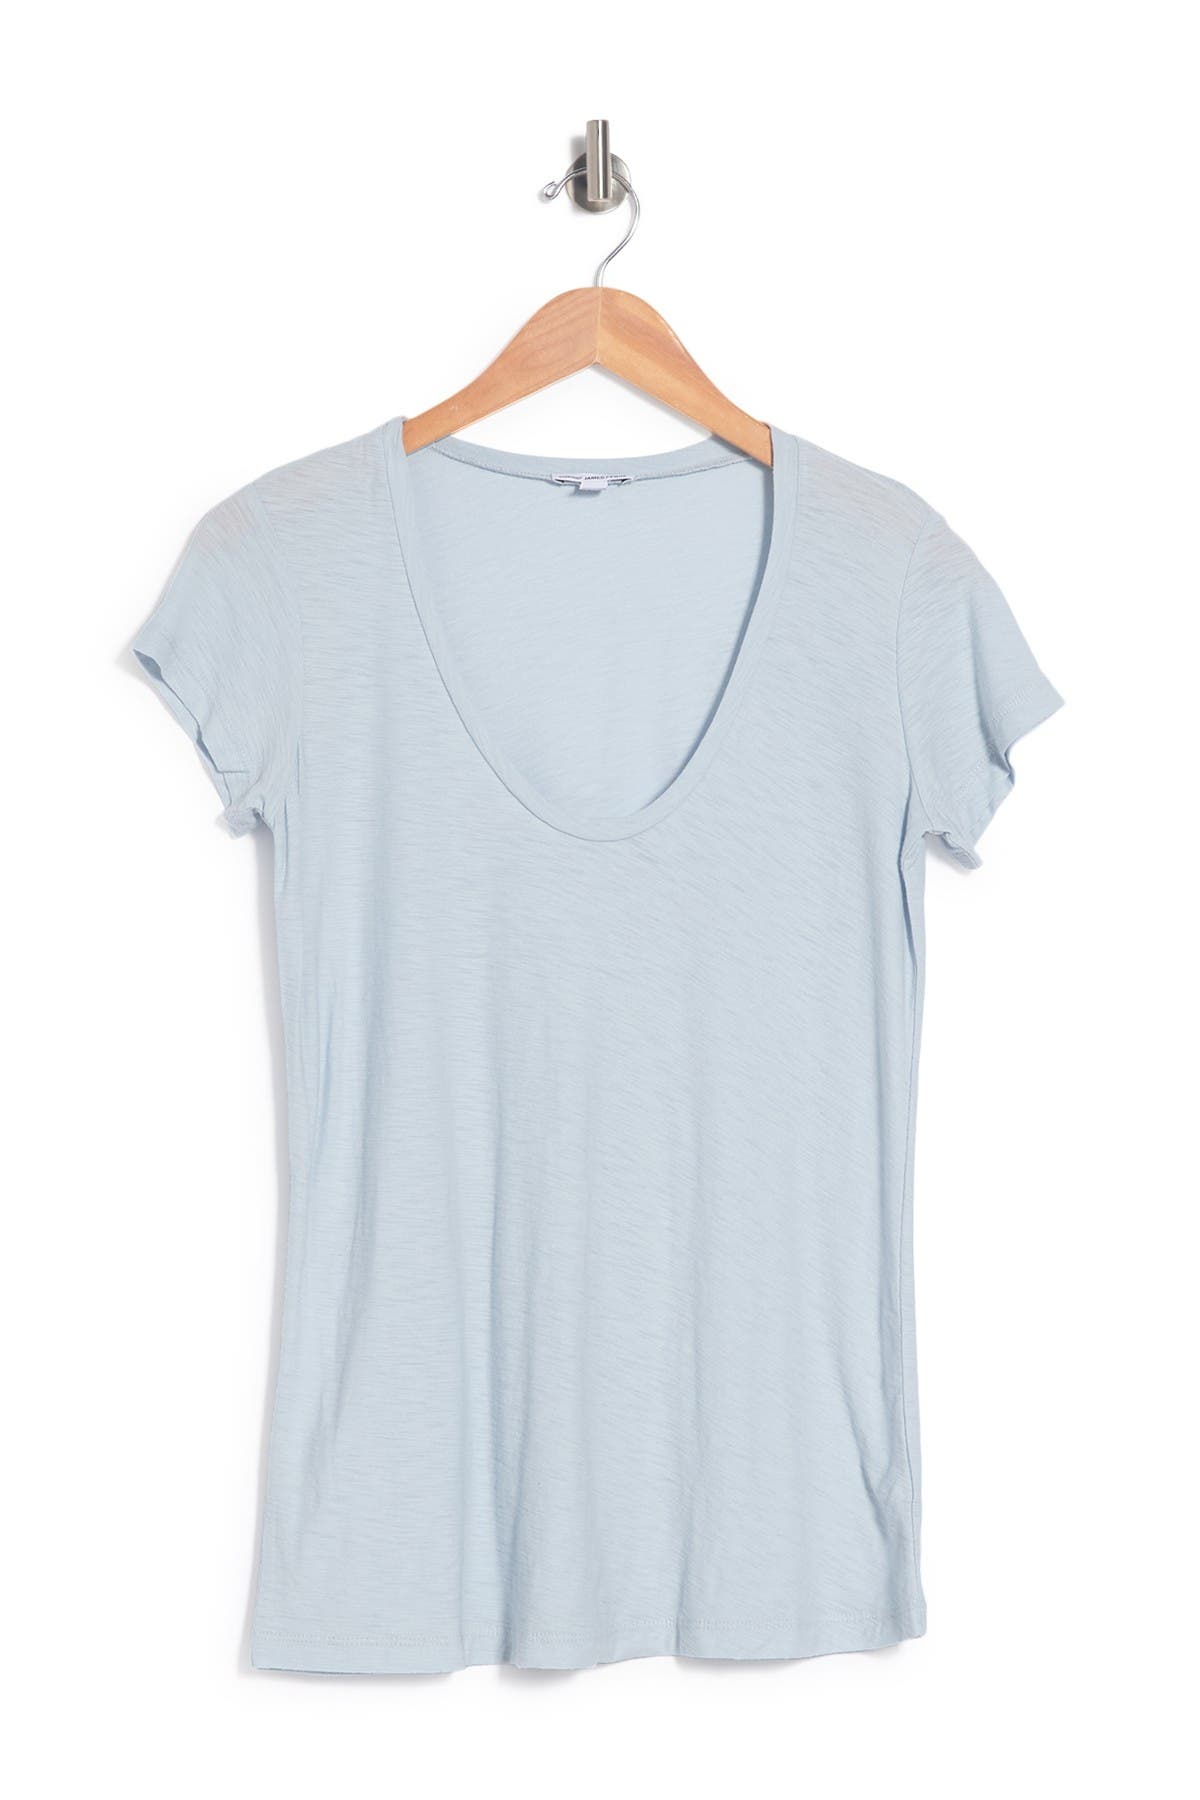 James Perse Deep Scoop Neck T-shirt In Silver7